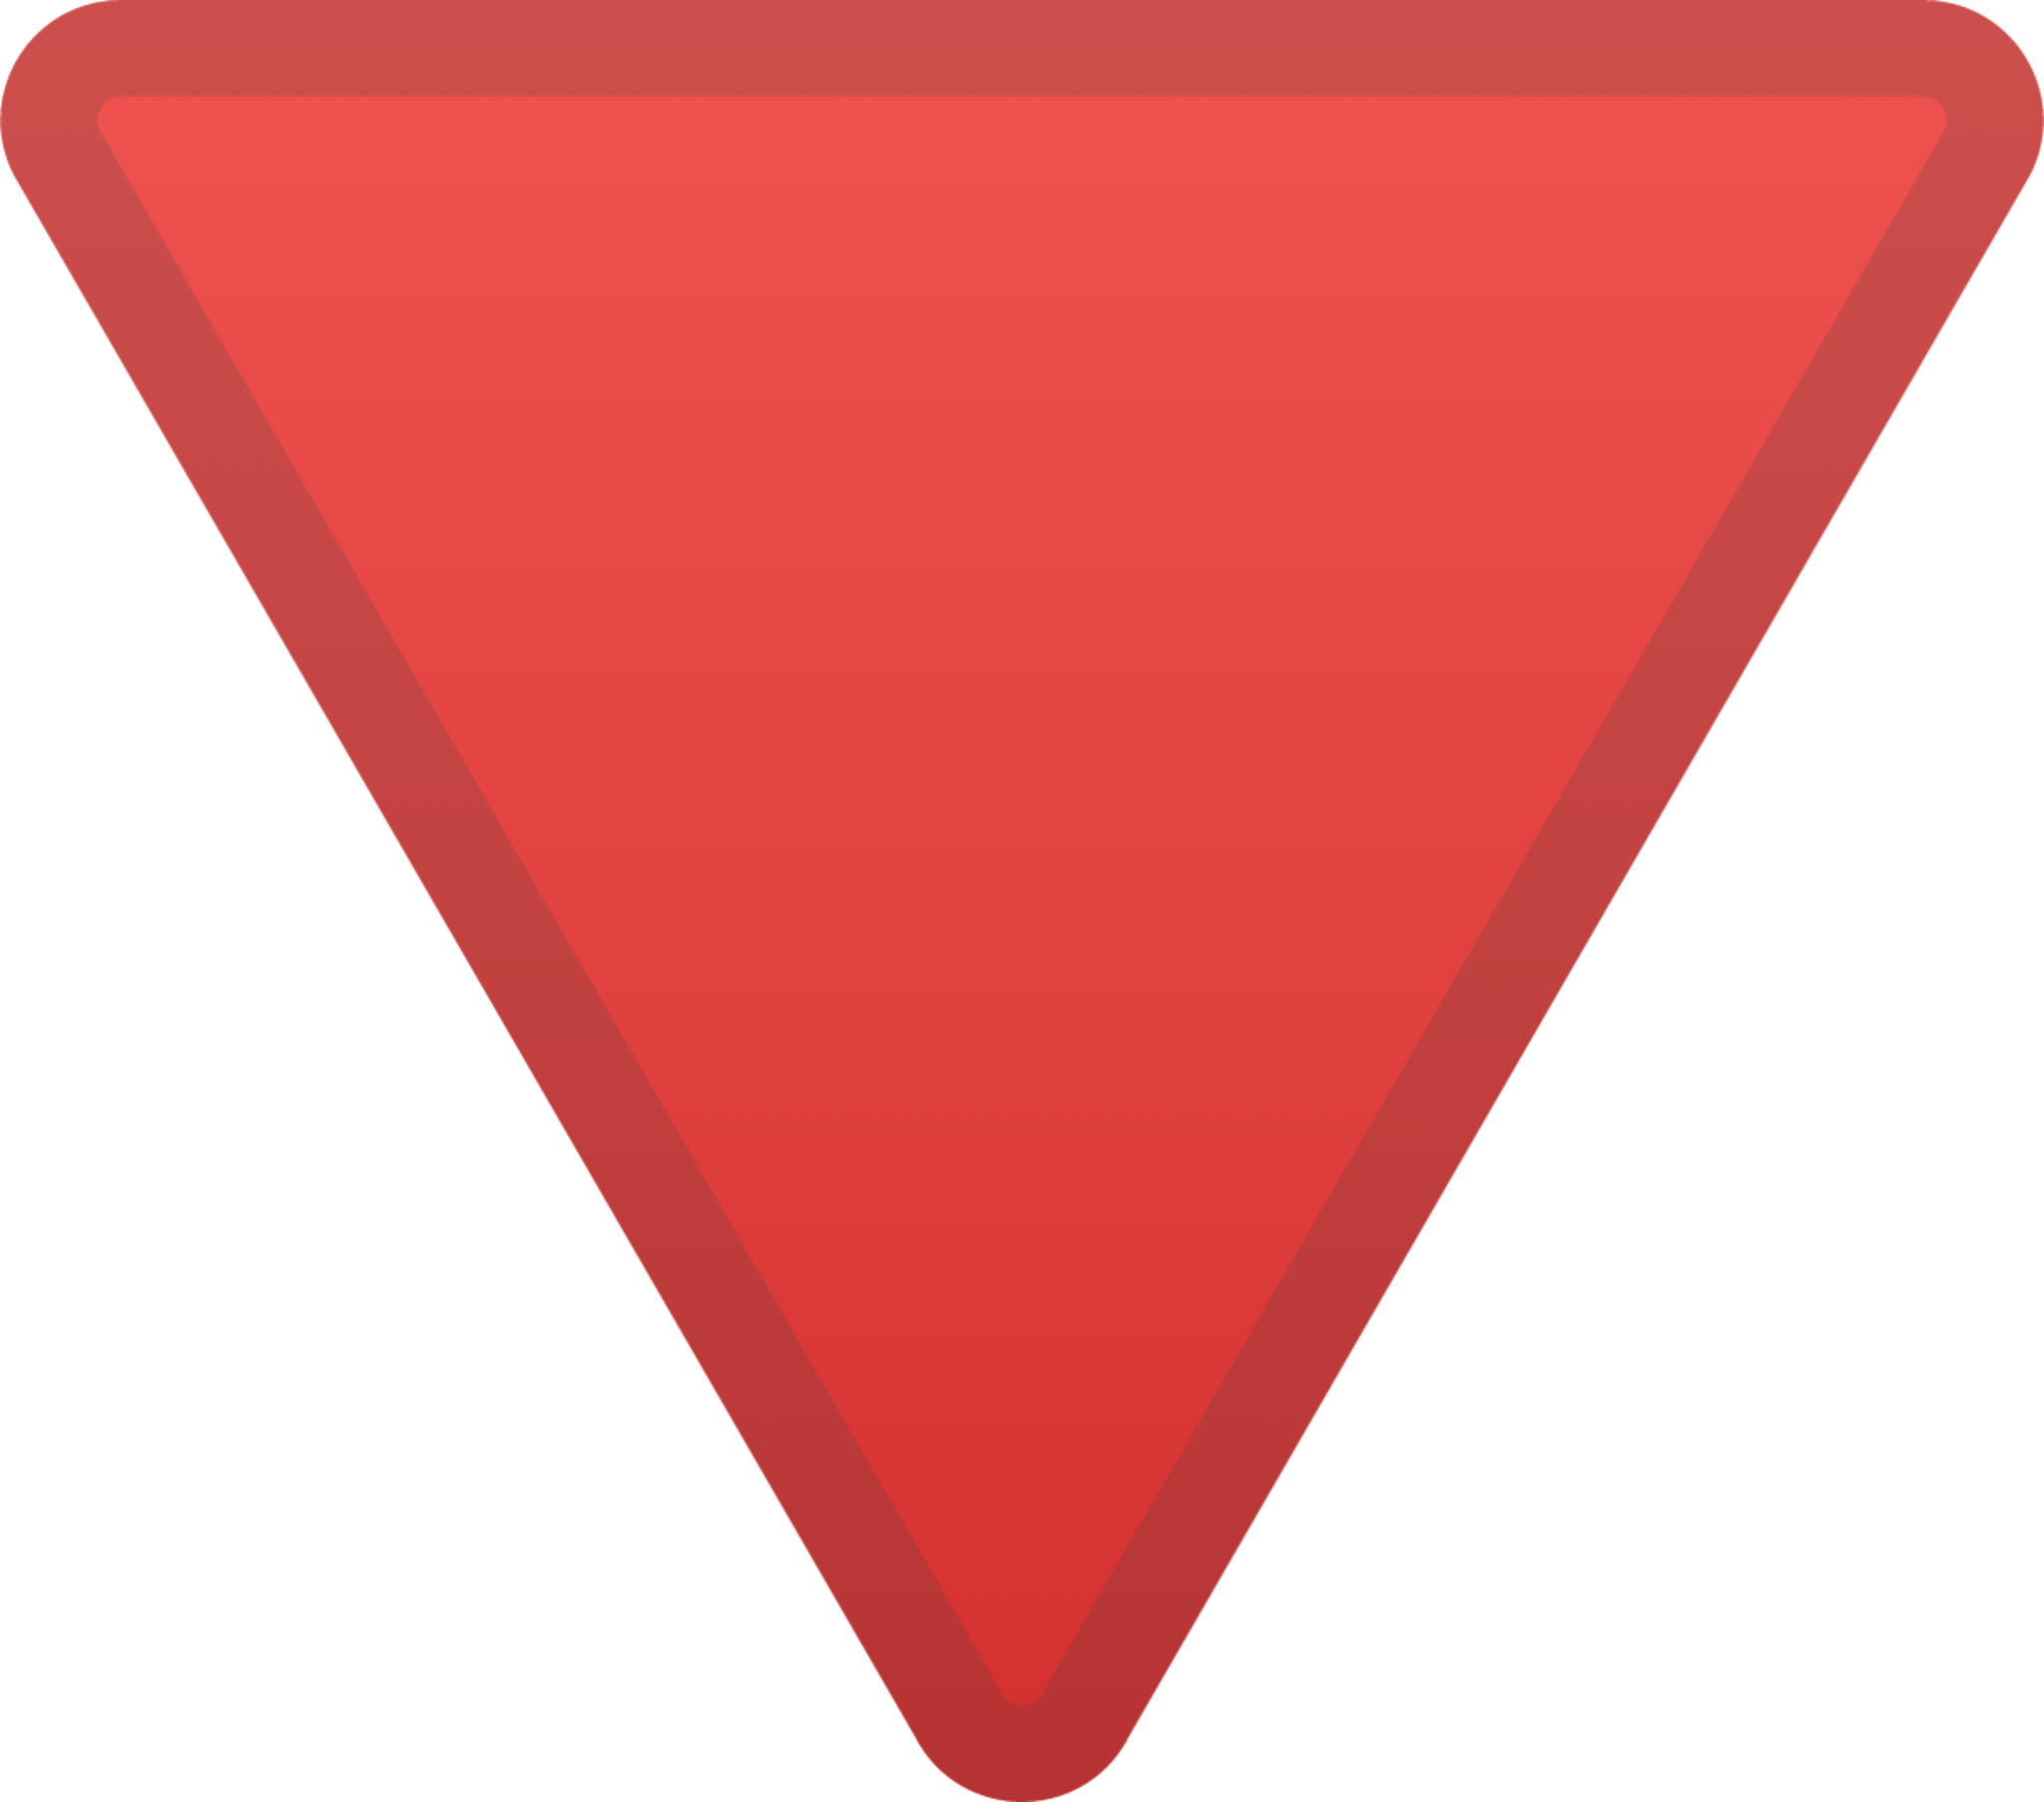 red triangle pointed down emoji